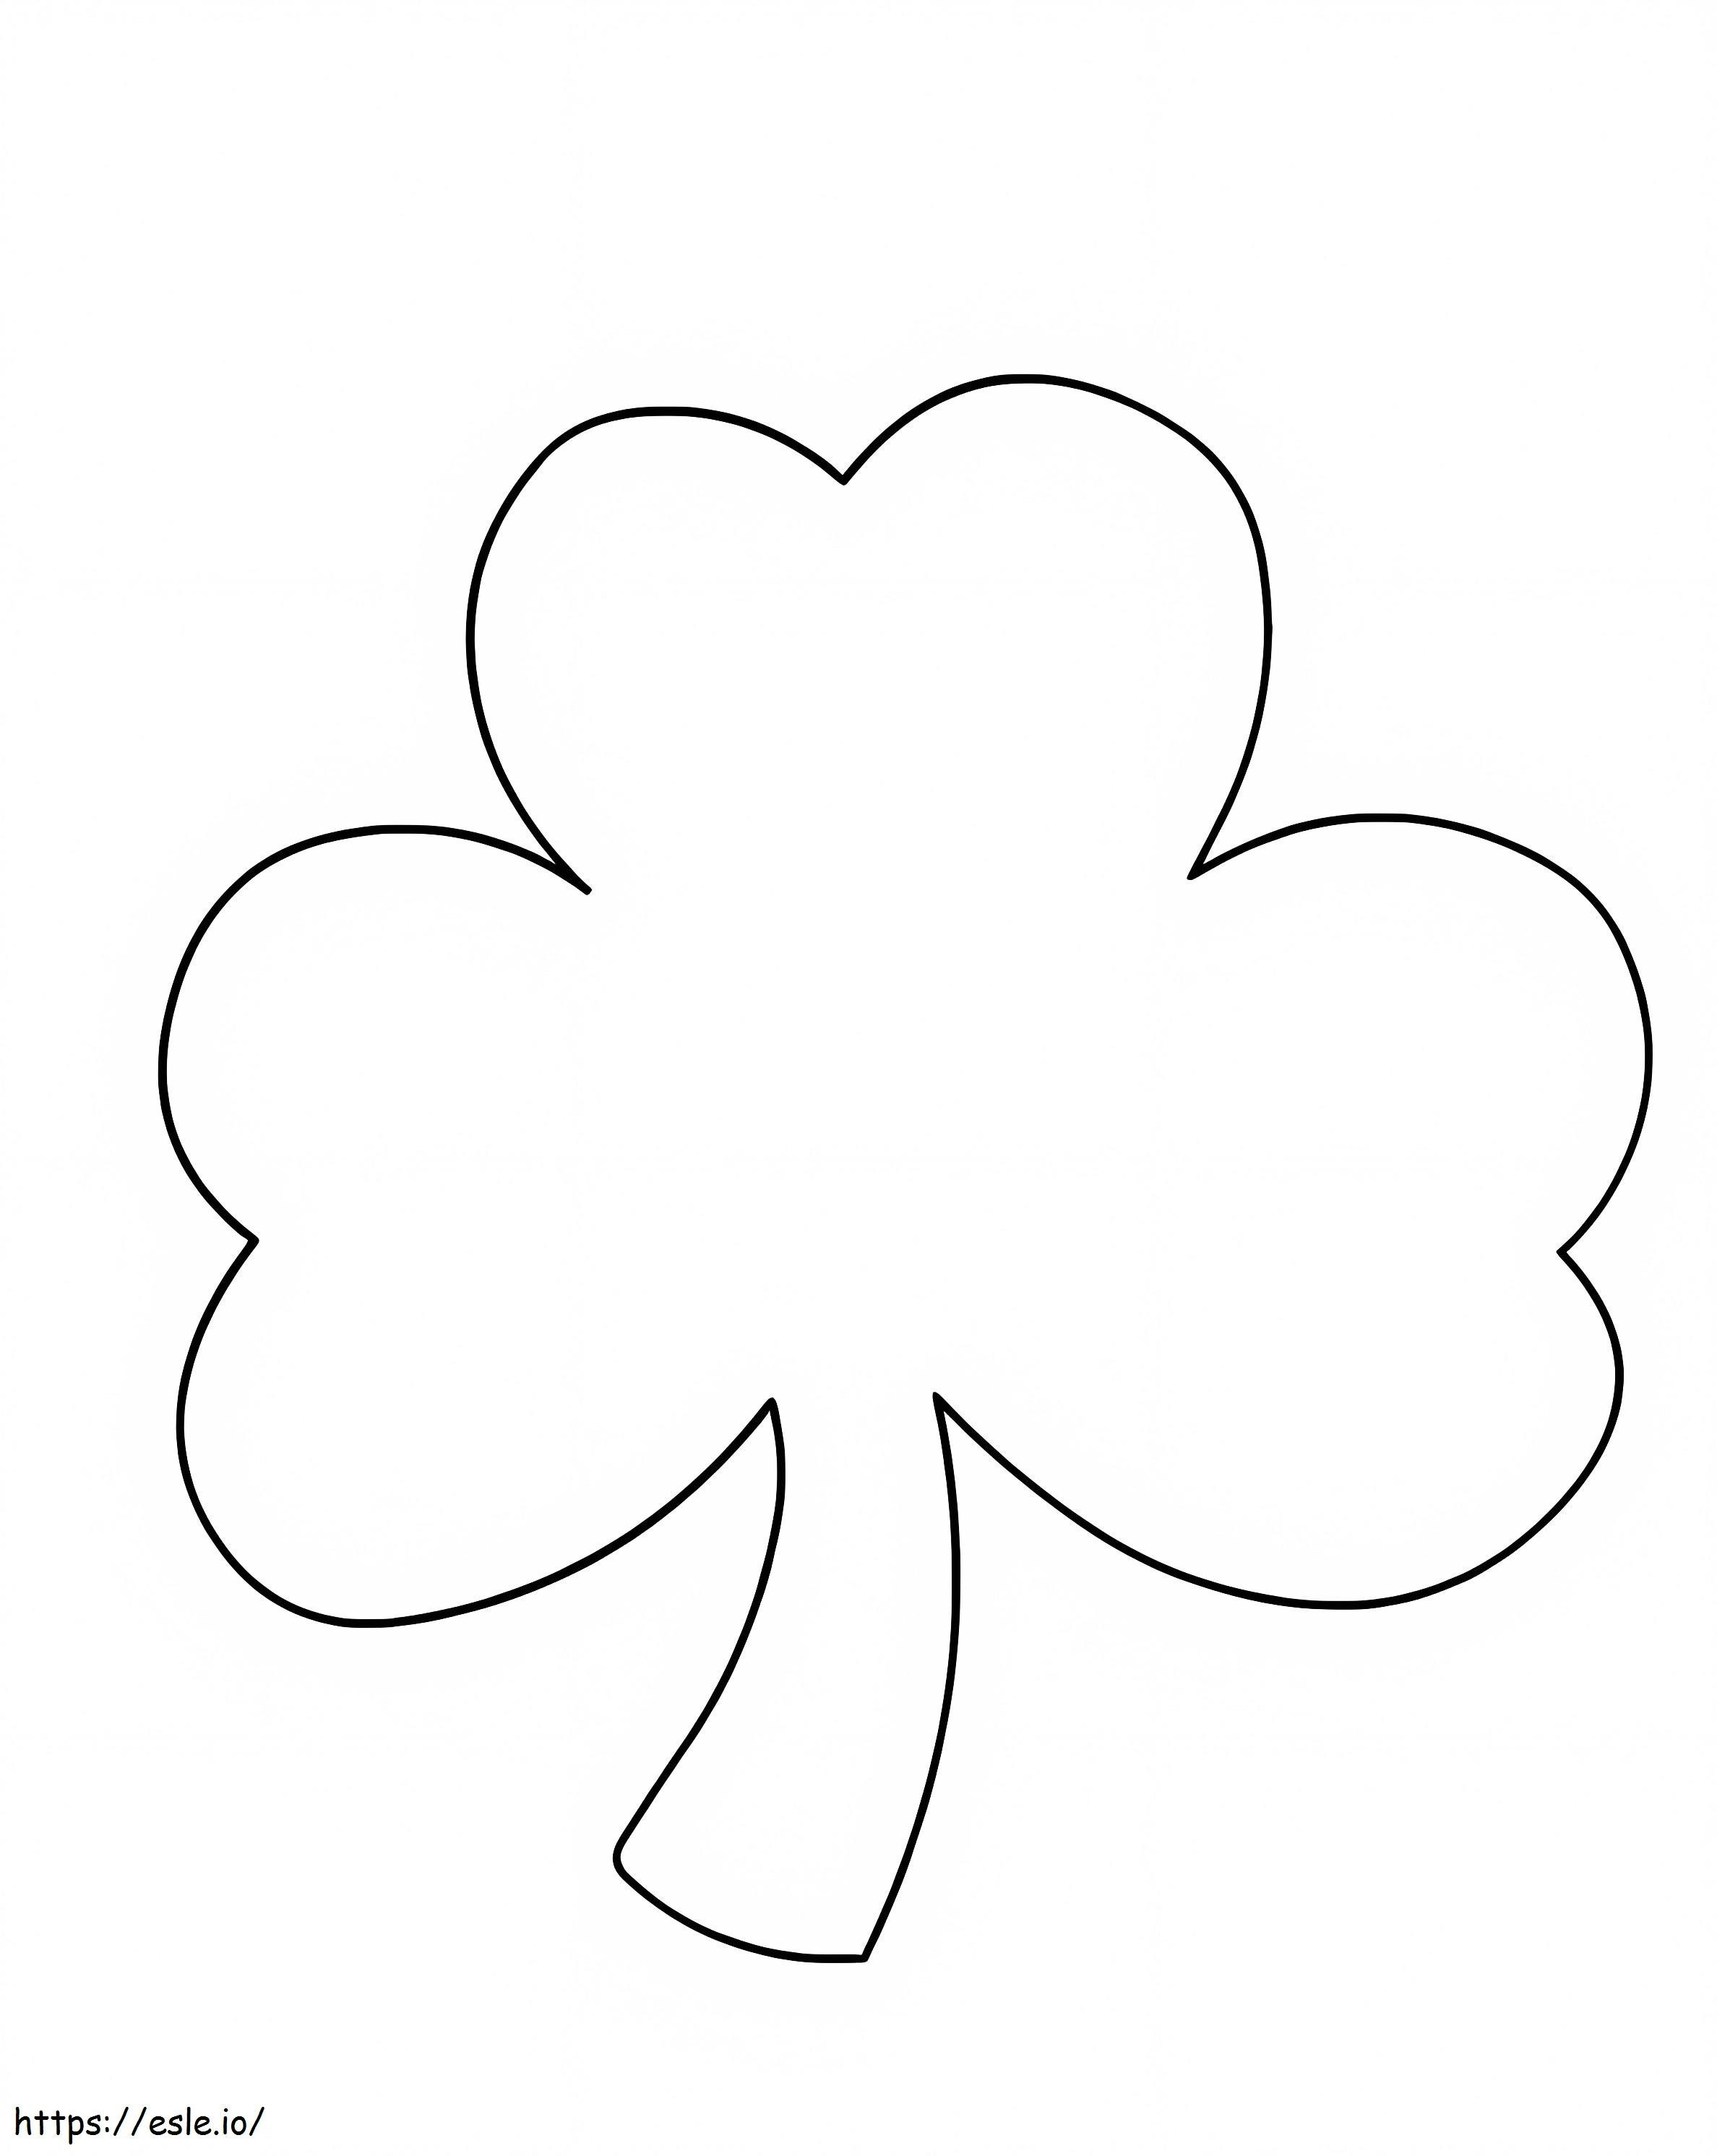 Awesome Clover 1 coloring page